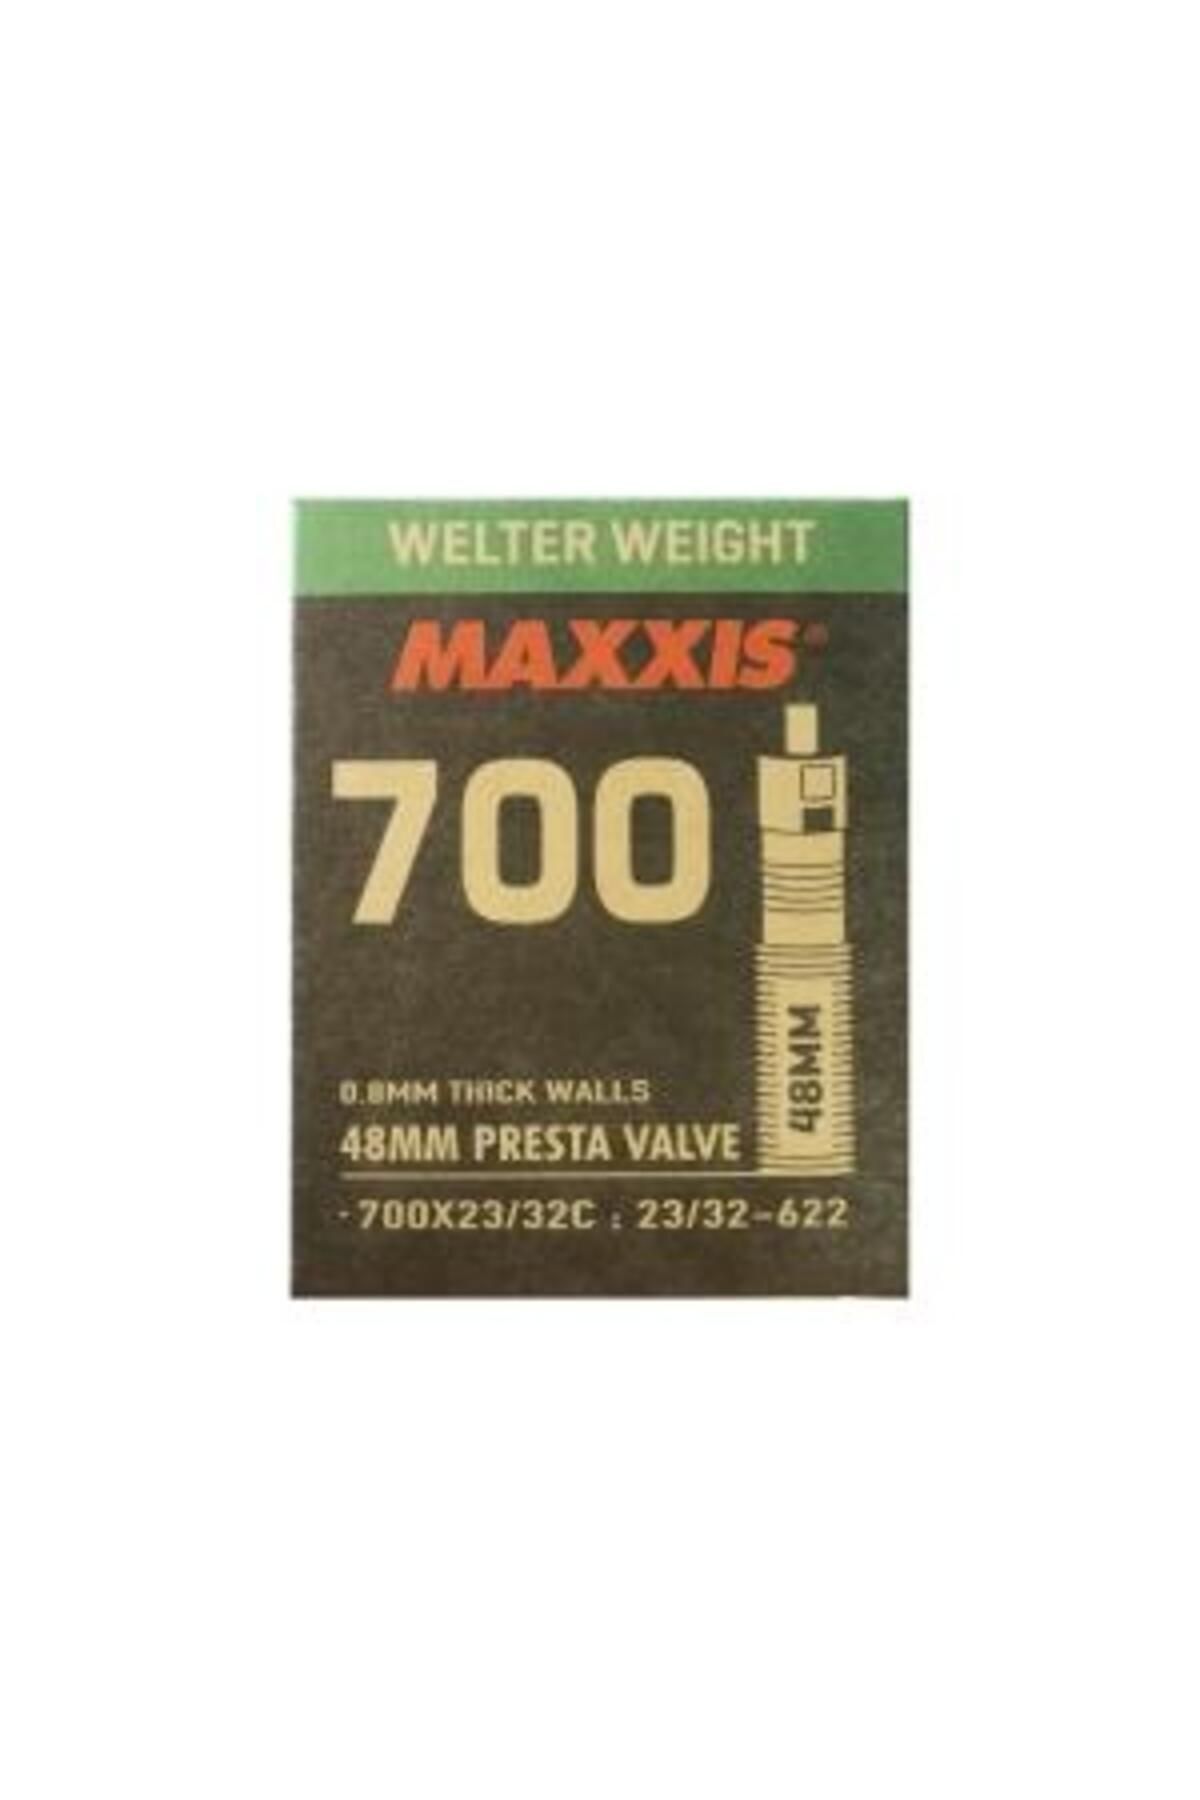 Maxxis Welter Weight Iç Lastik 700x23-32c Ince Sibop 48mm